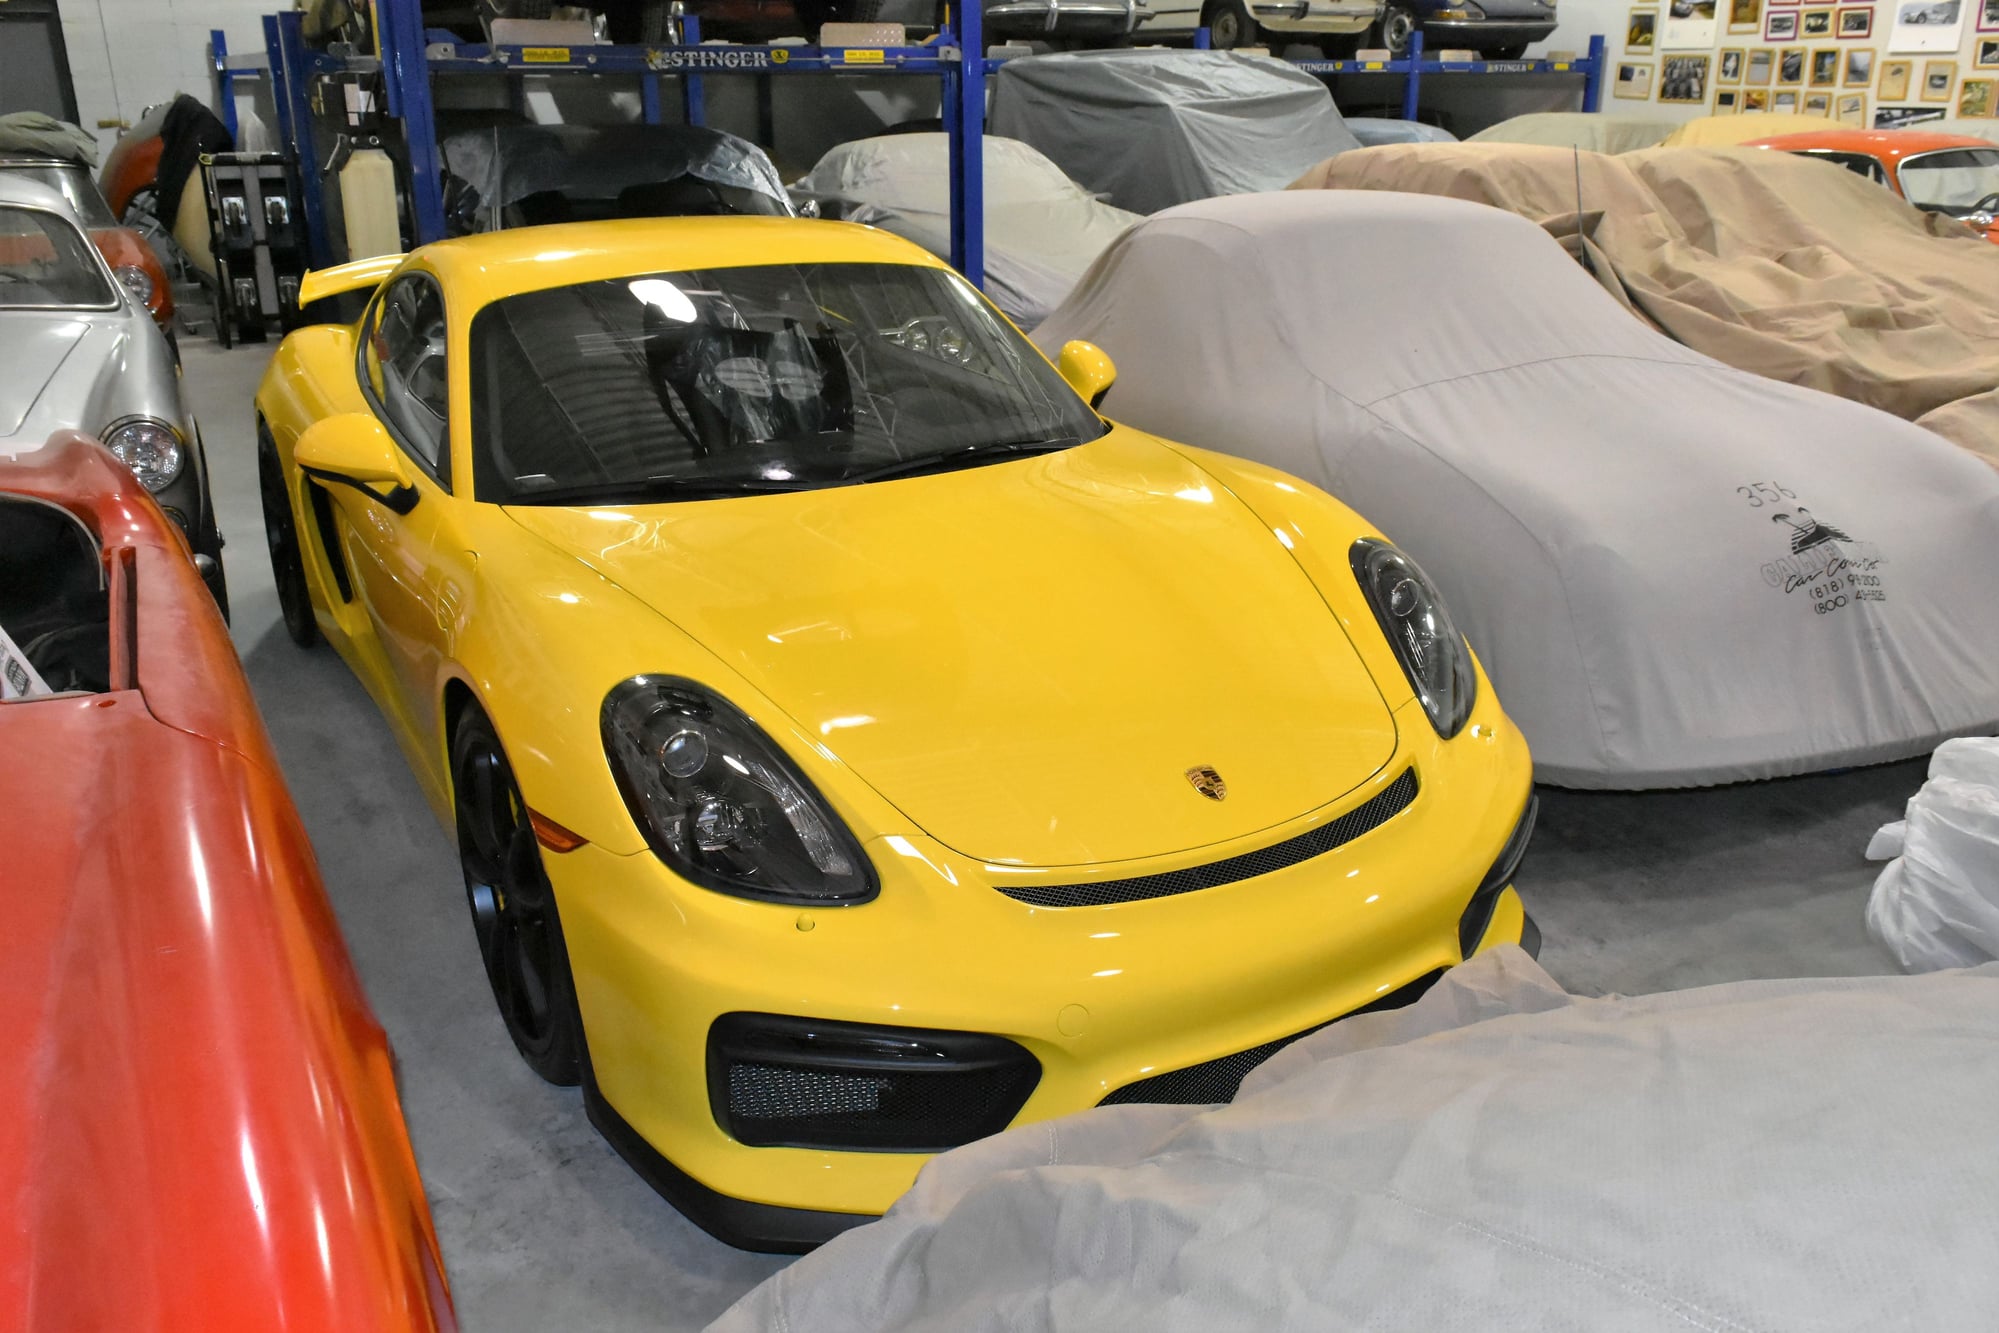 2016 Porsche Cayman GT4 - 2016 Cayman GT4 with 11 miles for sale. Still has transport tape on pedals. - New - VIN WPOAC2A87GK192687 - 11 Miles - 6 cyl - 2WD - Manual - Coupe - Yellow - Mendham, NJ 0794, United States